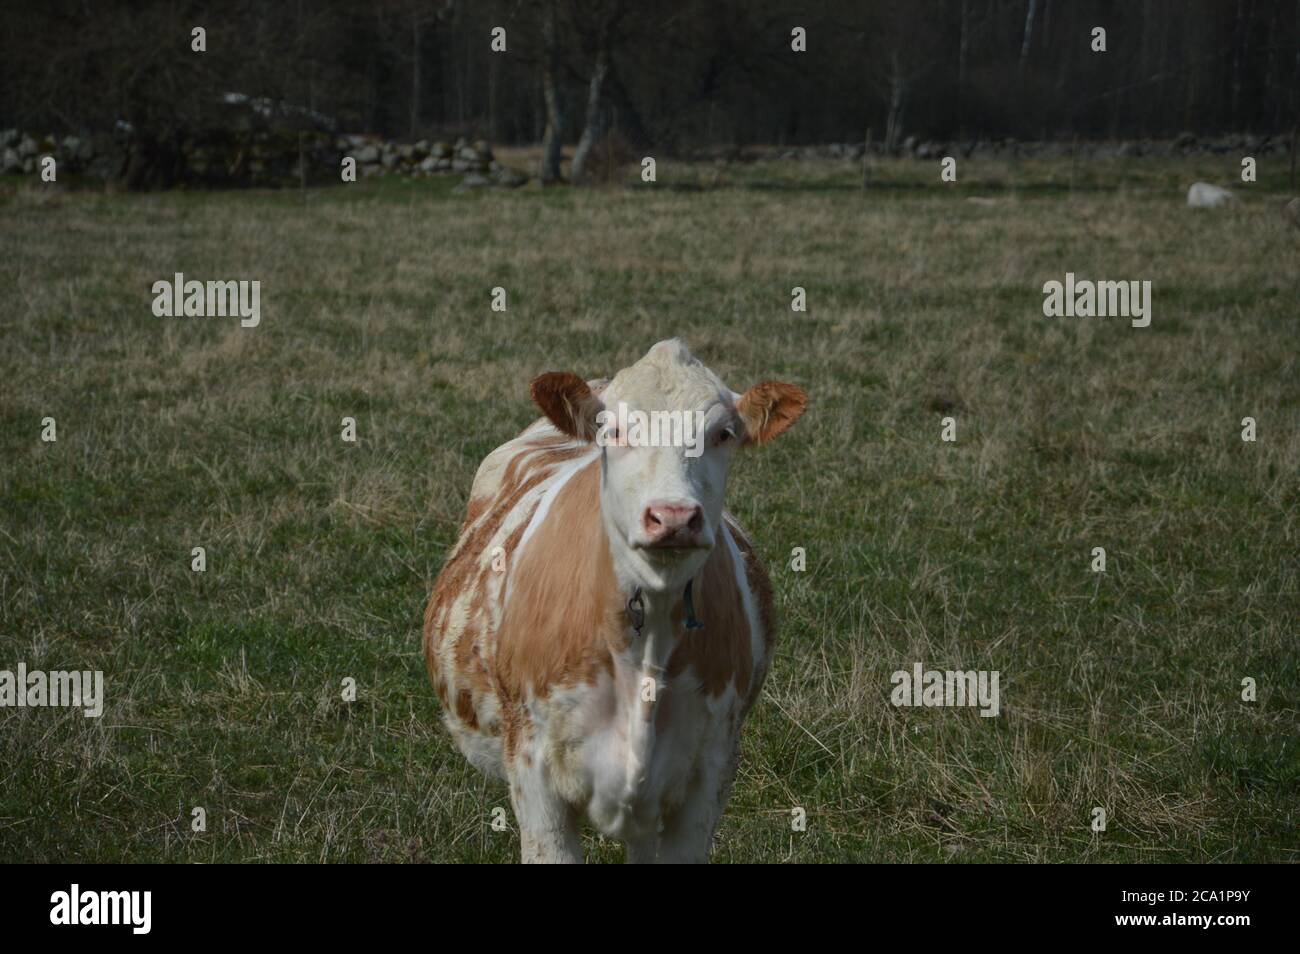 The power and force of a cow Stock Photo